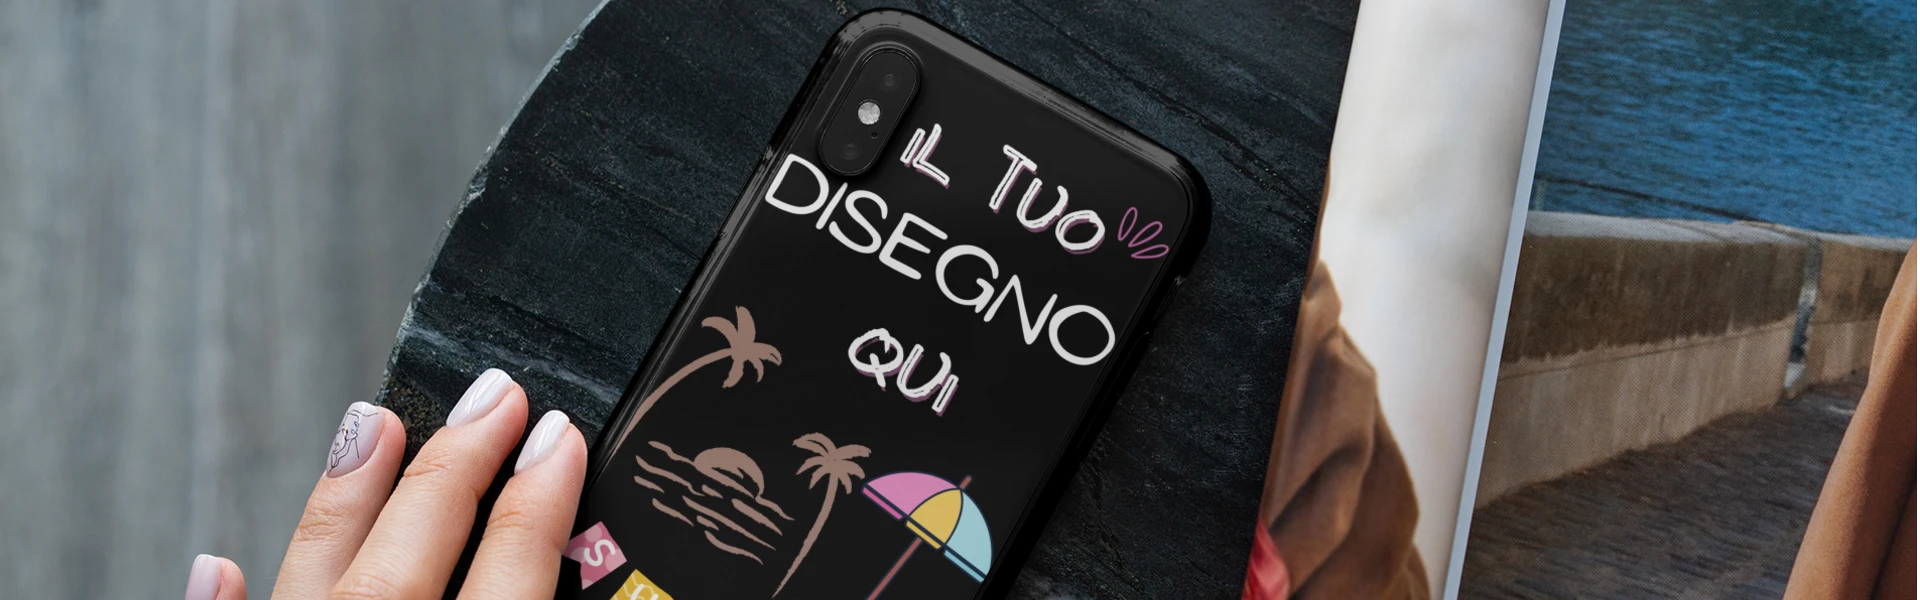 Cover iPhone Personalizzate